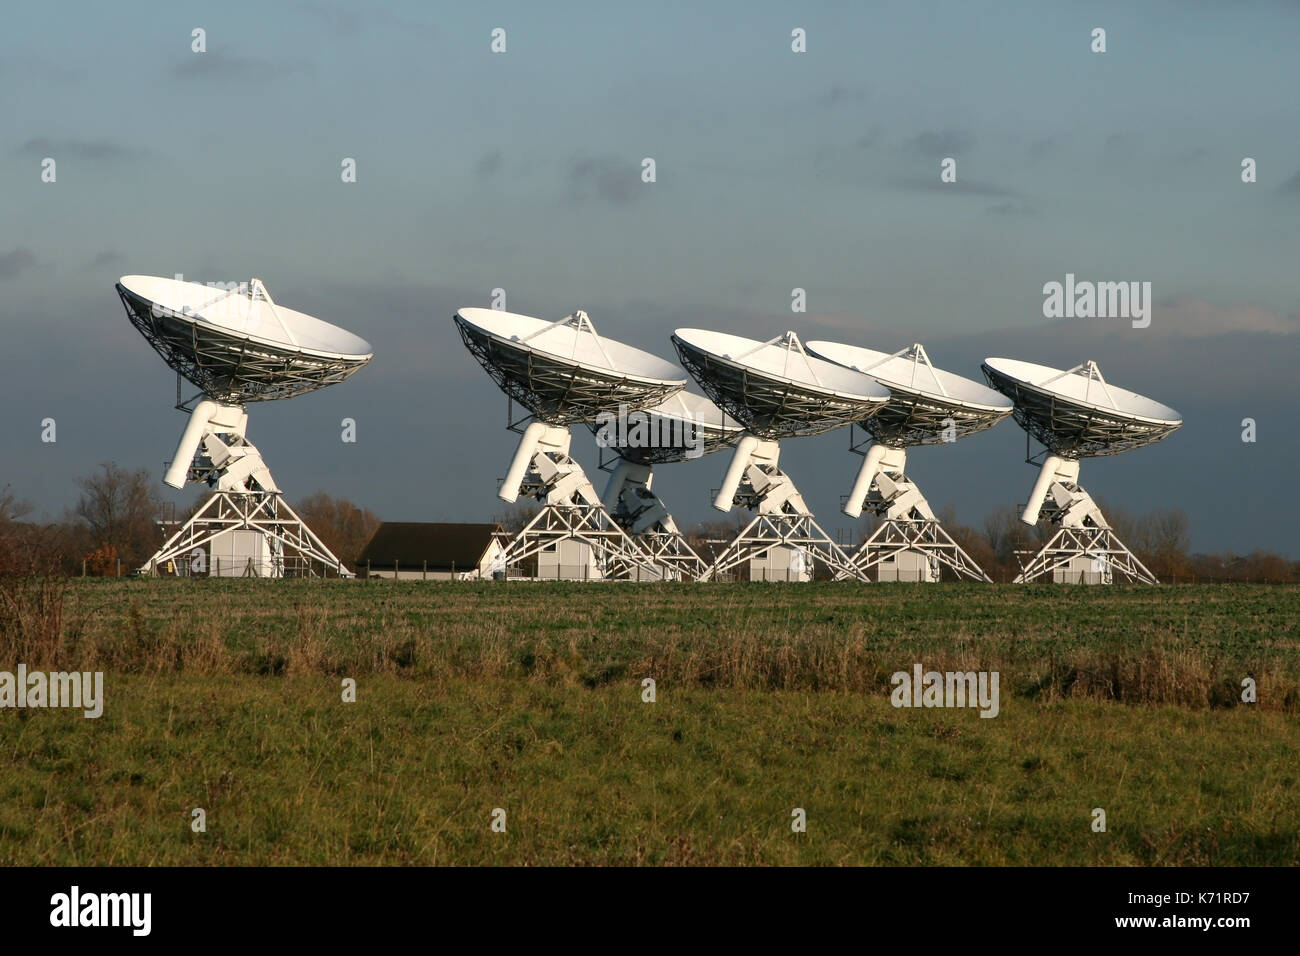 The Arcminute Microkelvin Imager AMI at the Mullard radio observatory, located near Cambridge, UK. Stock Photo